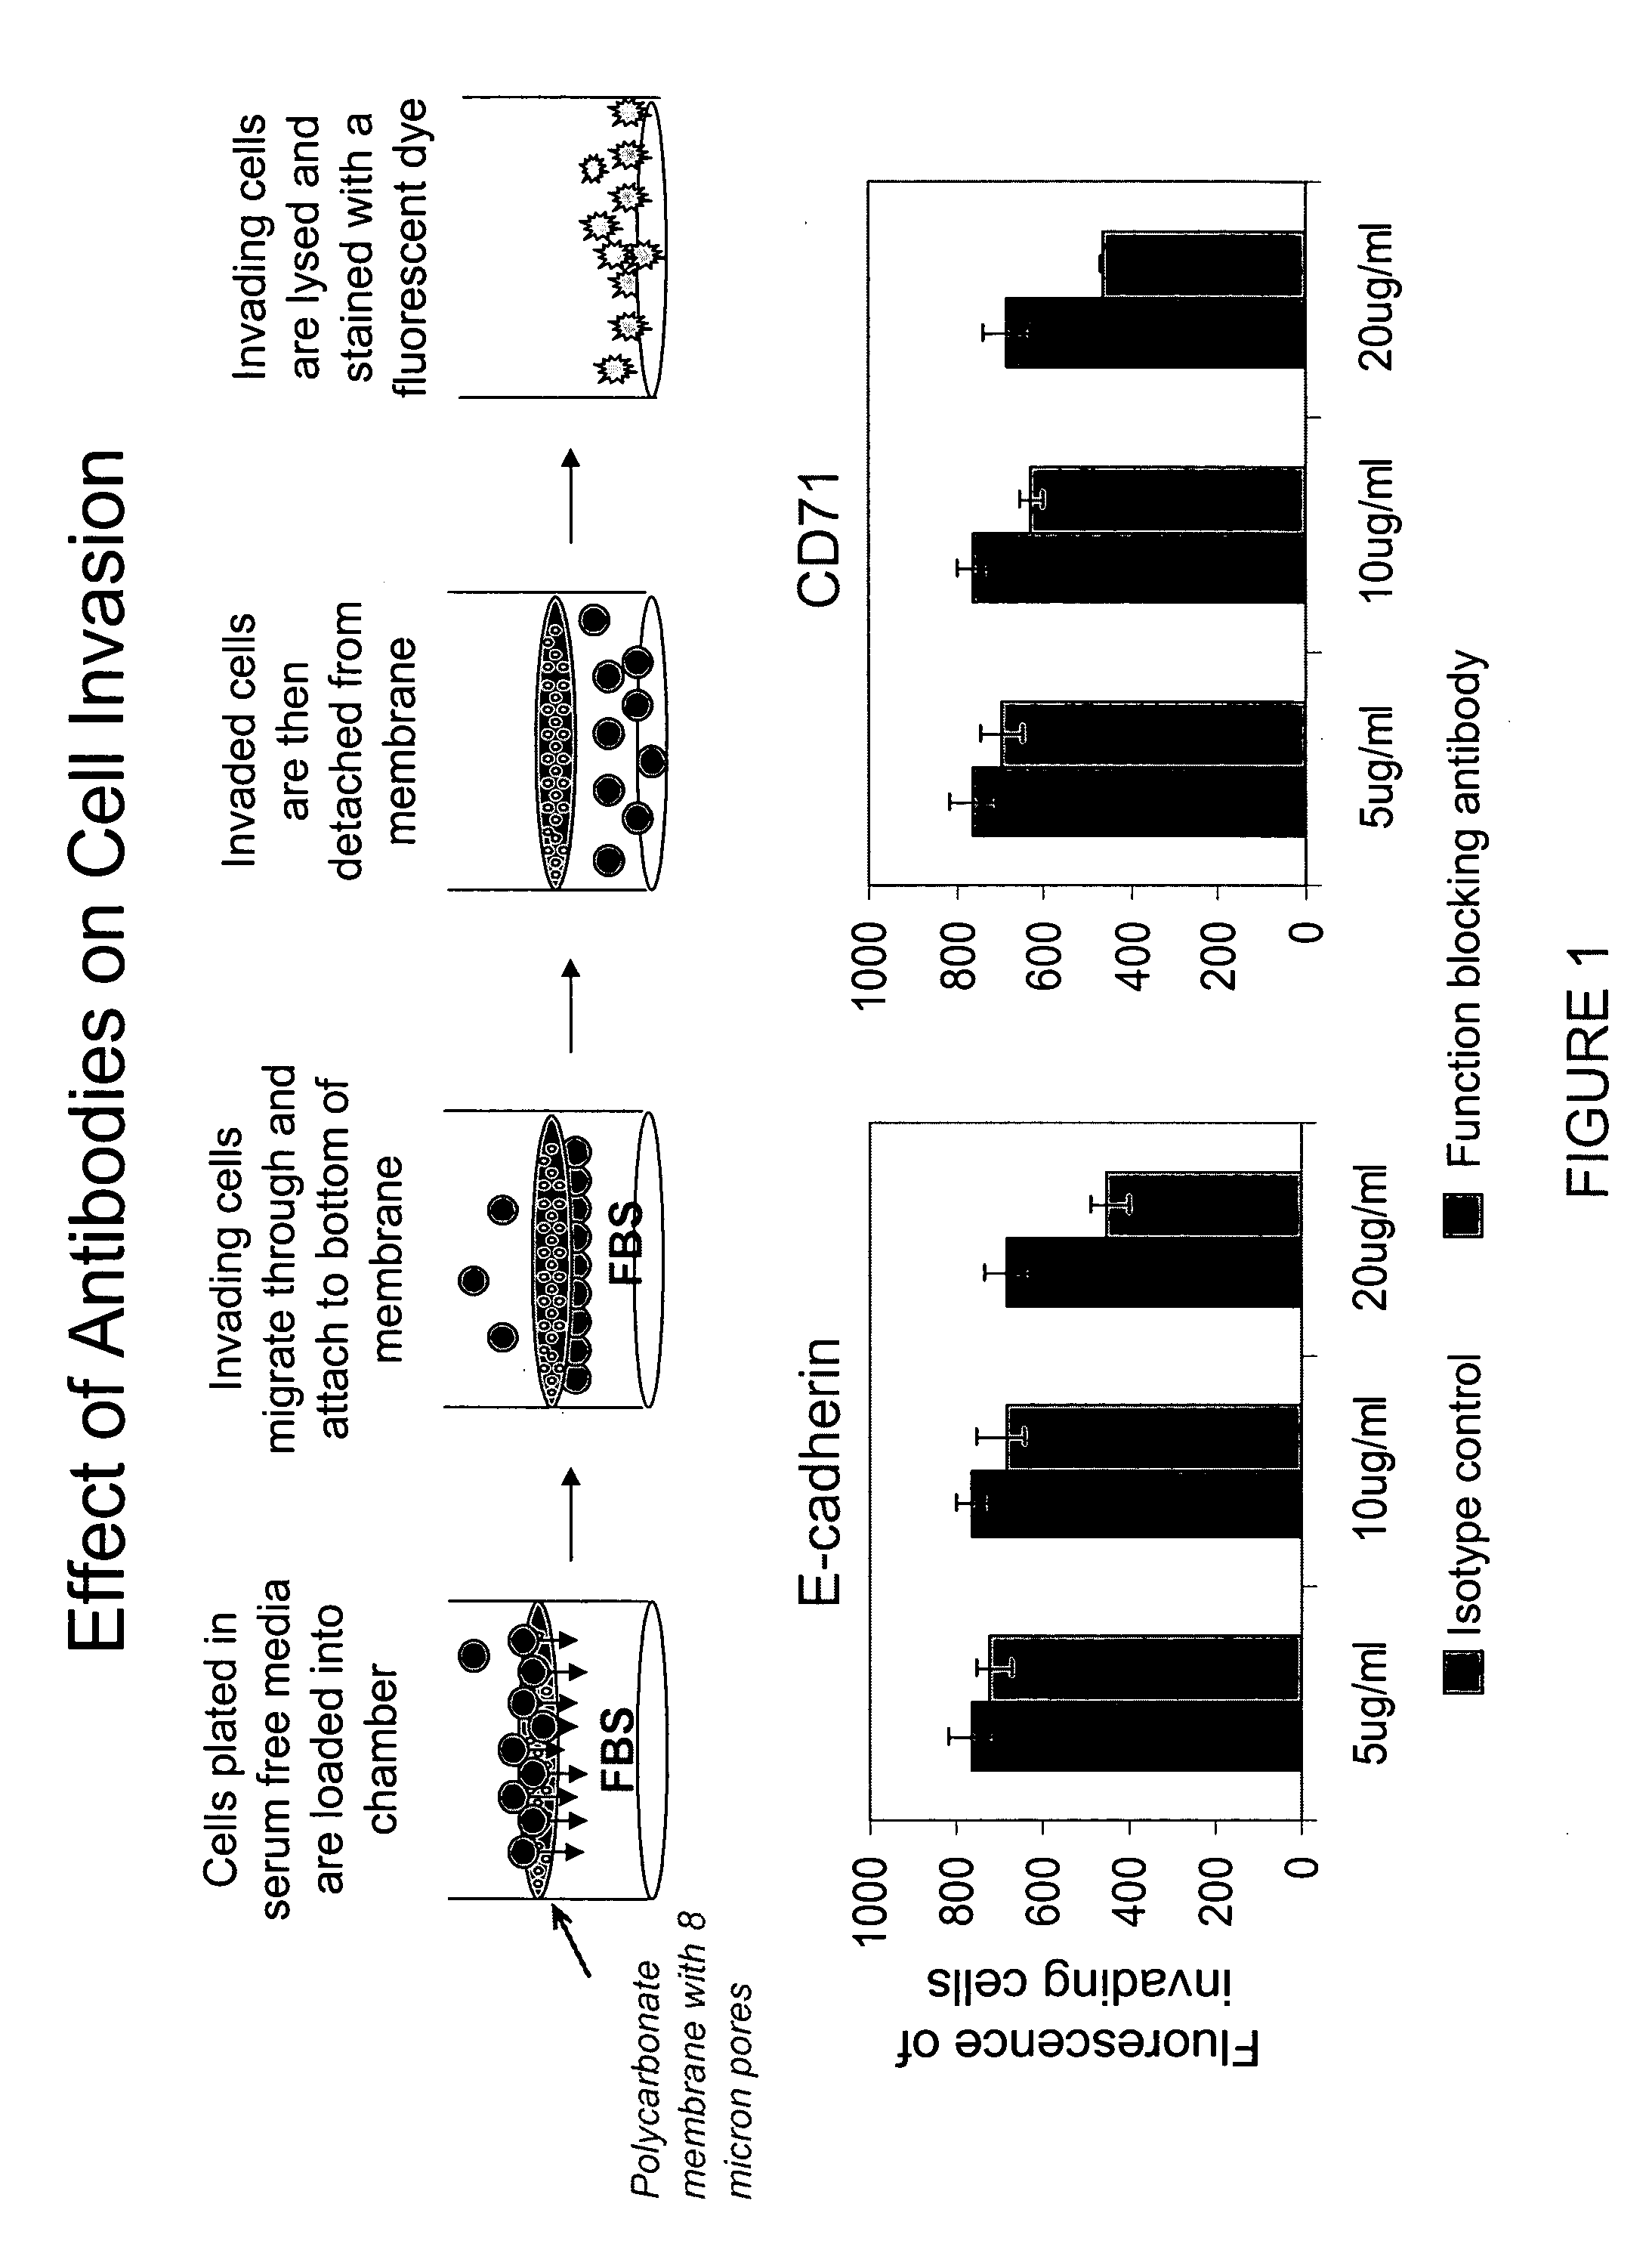 Method and compositions for treating diseases targeting E-cadherin